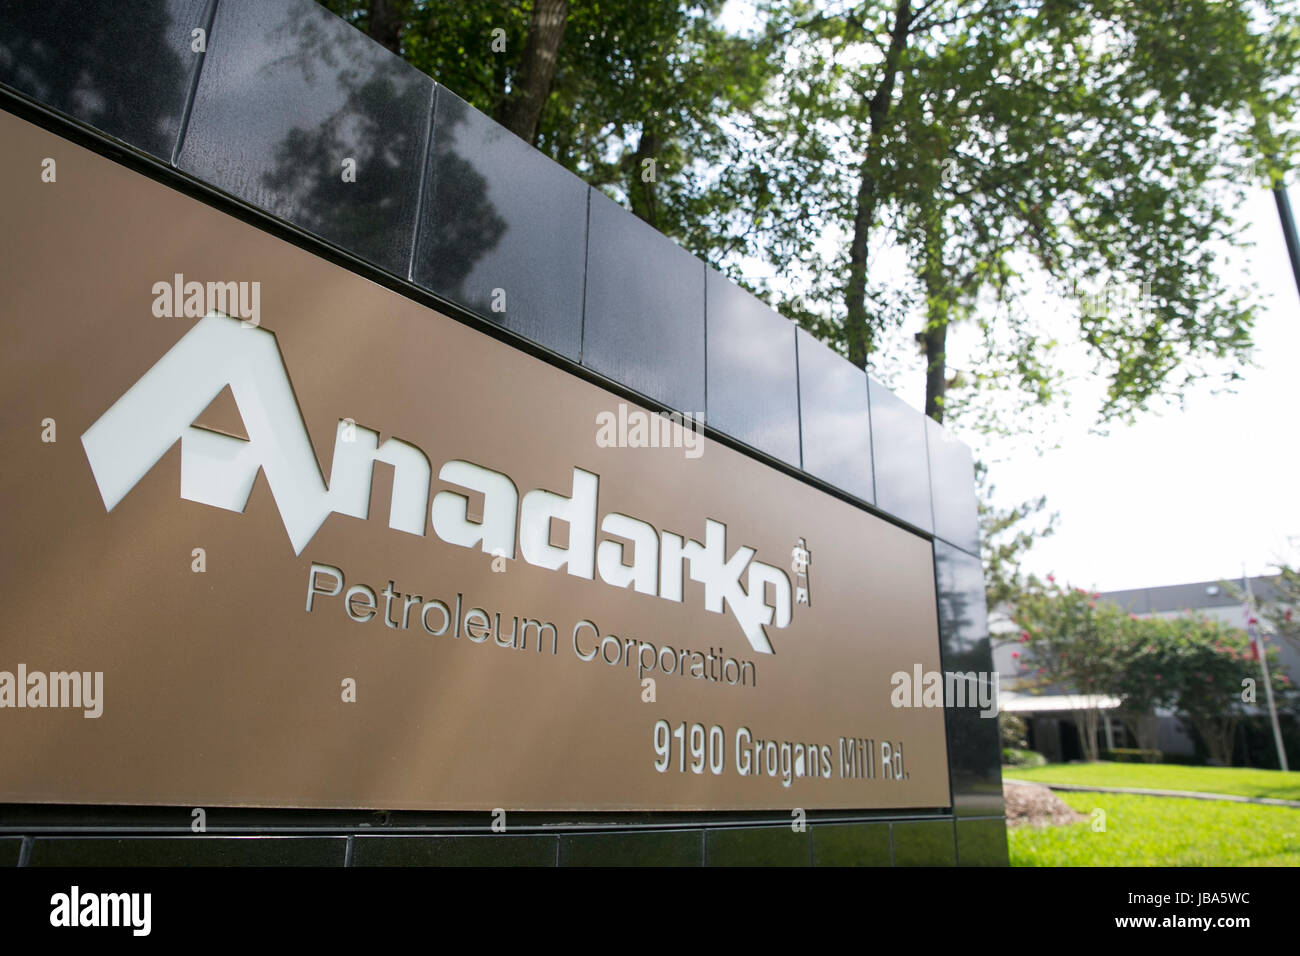 A logo sign outside of a facility occupied by the Anadarko Petroleum Corporation in The Woodlands, Texas, on May 28, 2017. Stock Photo